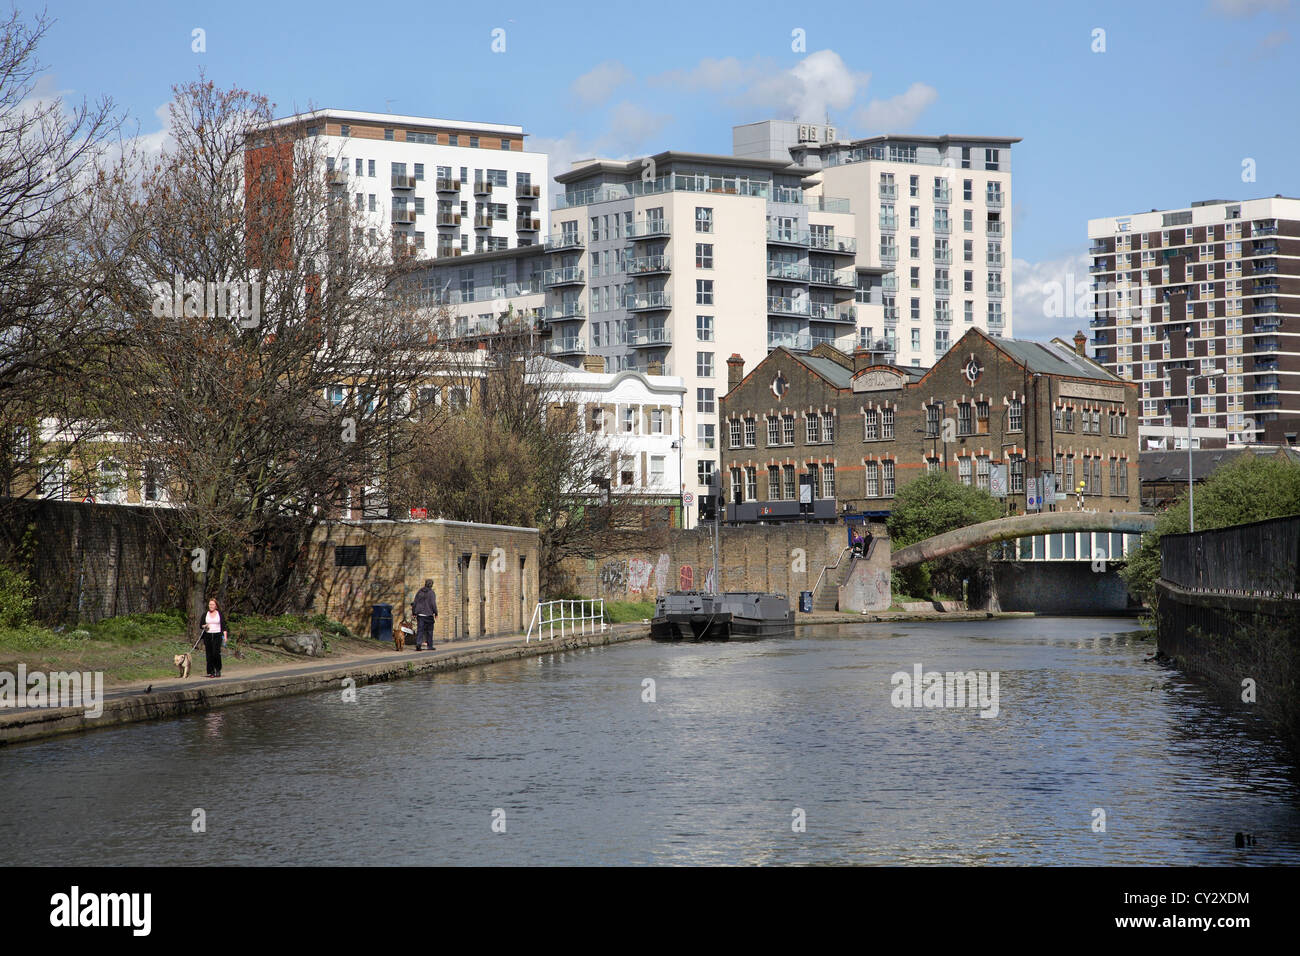 Regents Canal in Hackney, Central London. Modern residential development in background Stock Photo